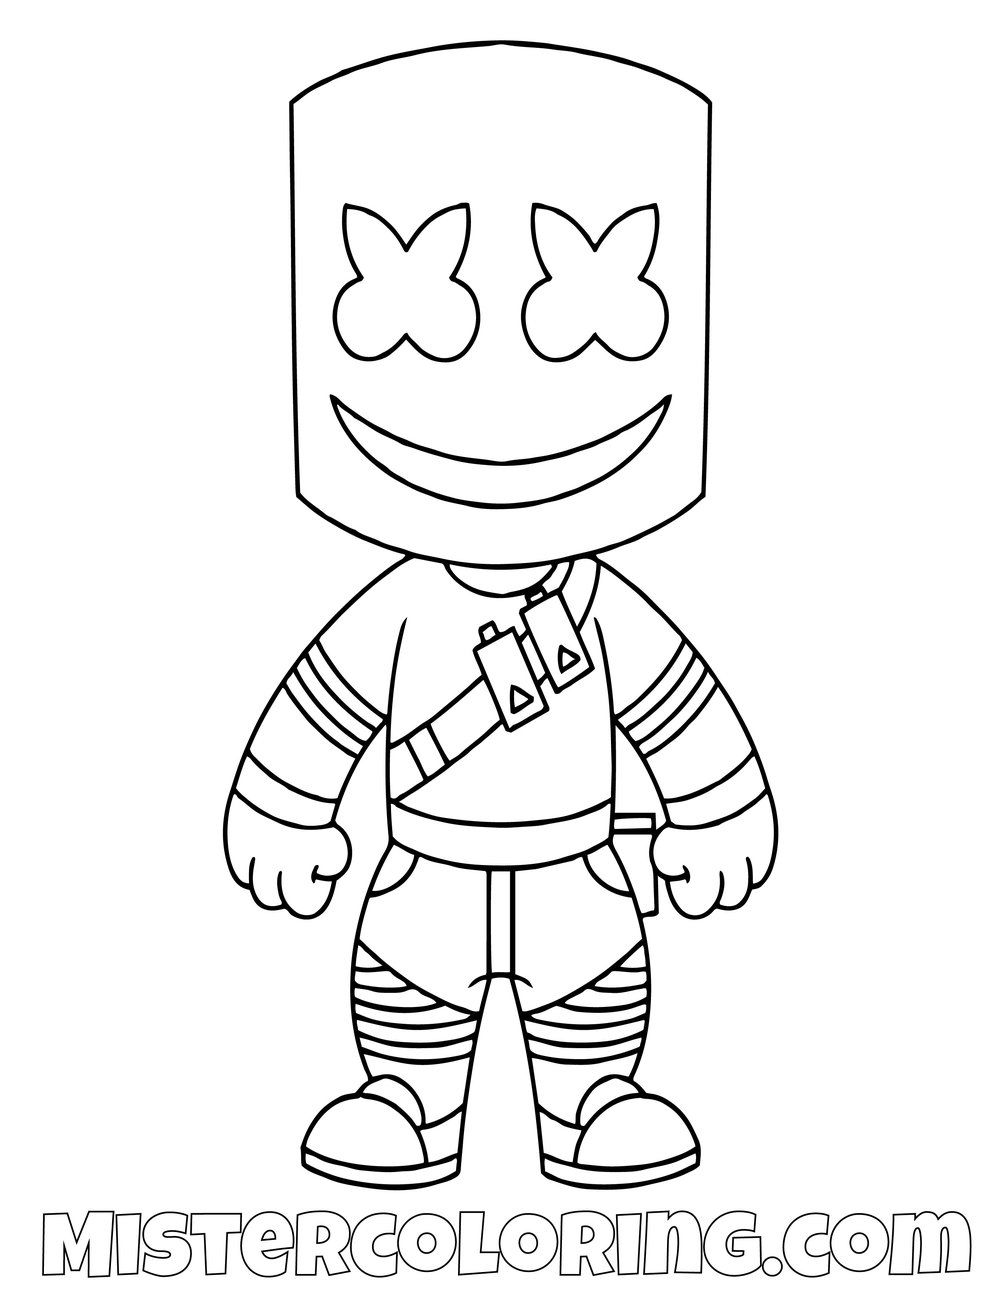 Free Marshmello Chibi Skin Fortnite Coloring Page For Kids | Cool ...